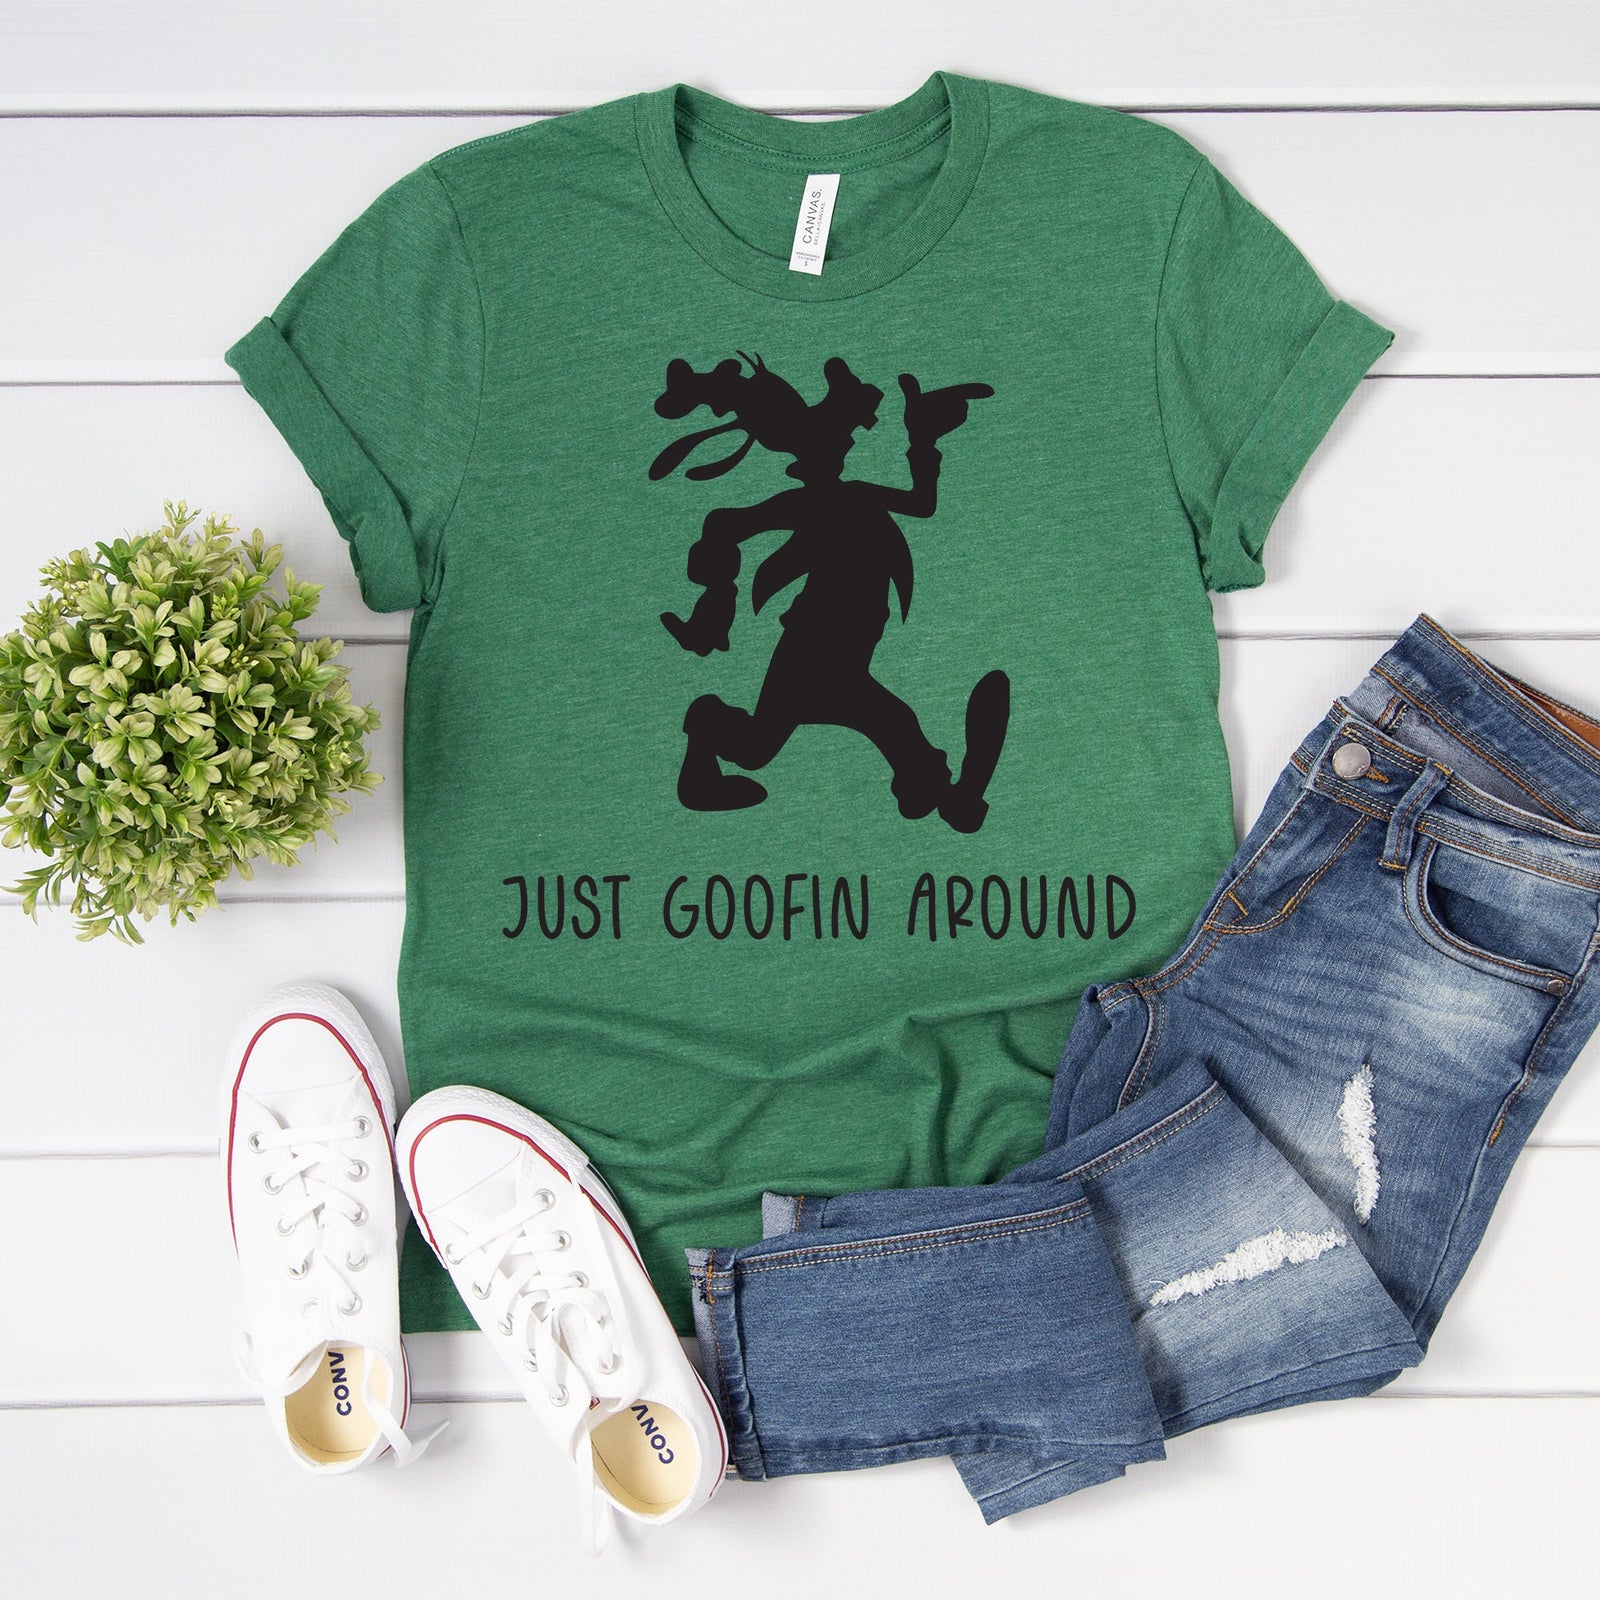 Just Goofin Around Goofy Adult Unisex T Shirt - Family Matching Shirts - Disney Characters